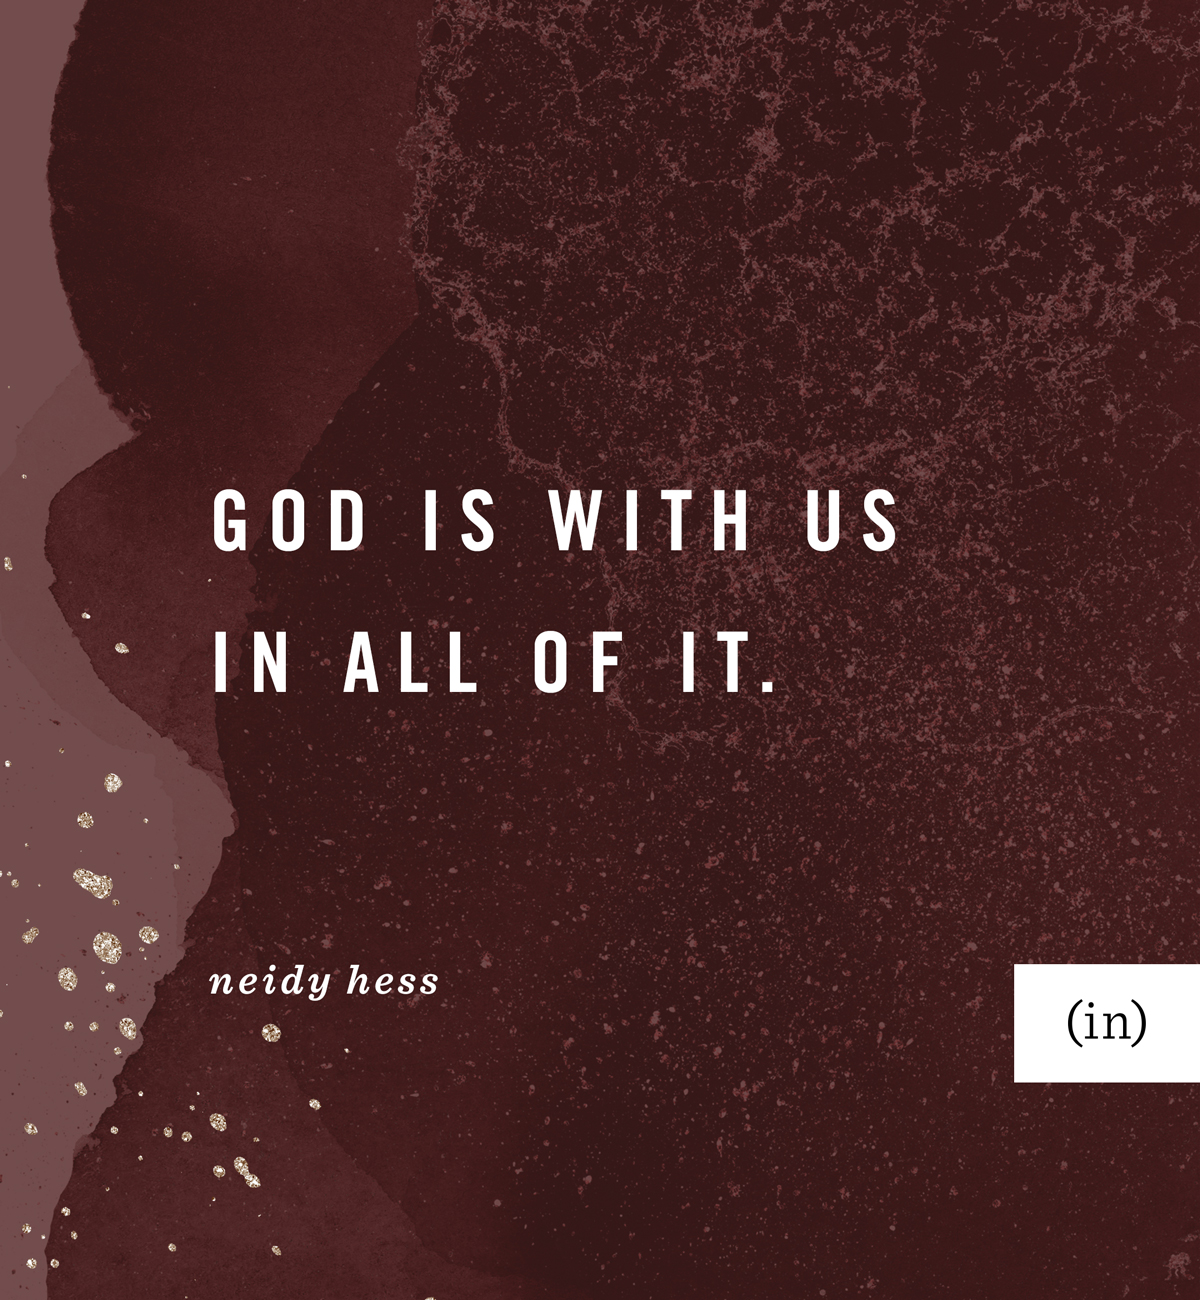 We can't expect all things to stay the same. Daylight will always transition to twilight—streetlights will eventually flicker on, and little boys will grow into young men. Yes, change is to be expected. But the beauty of all this constant change is that God is with us in all of it. -Neidy Hess